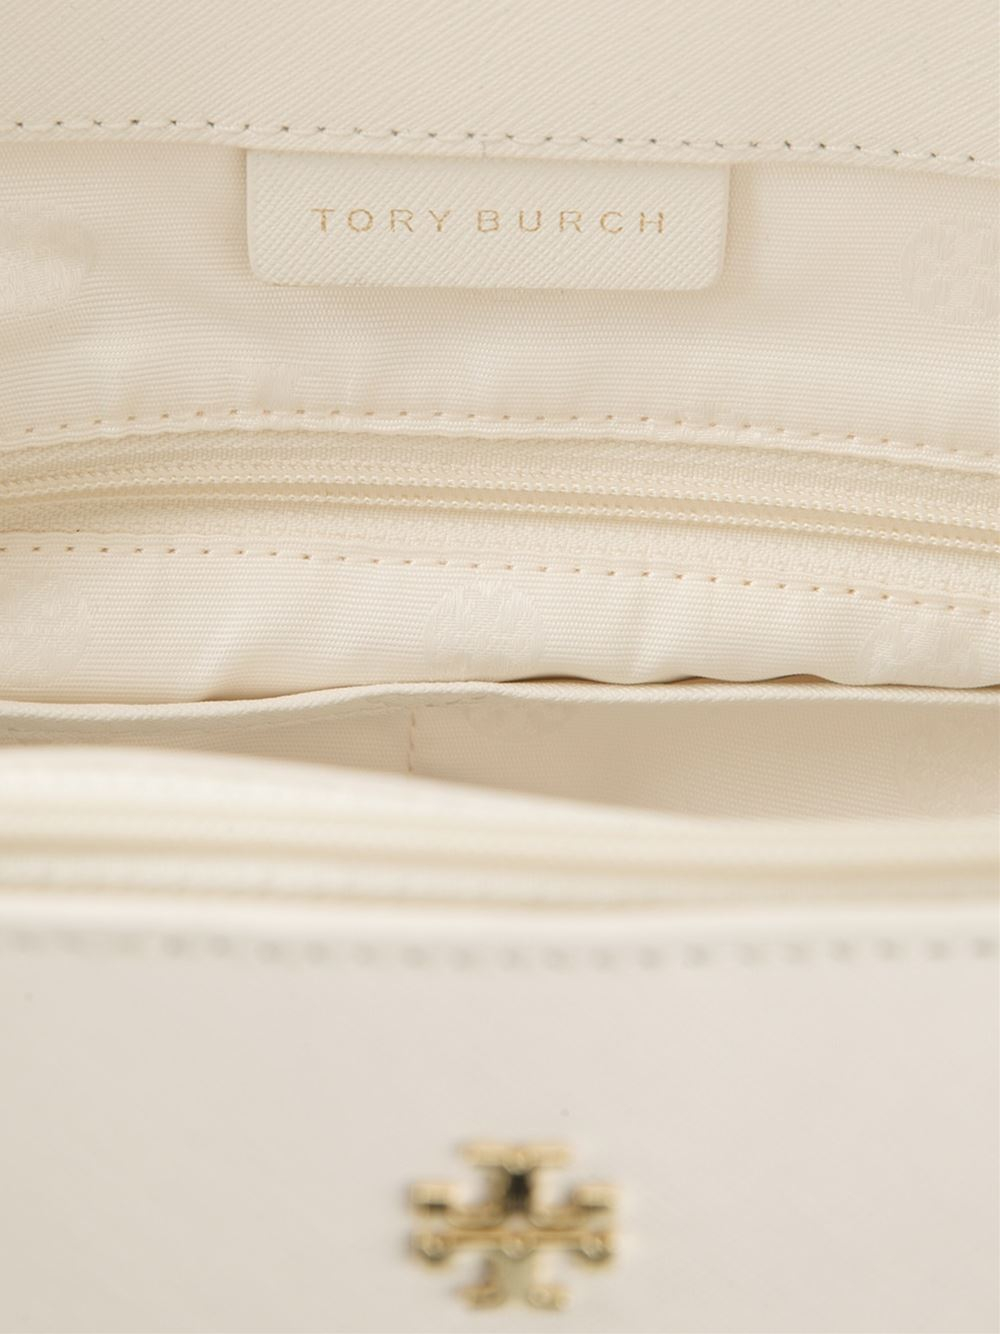 Tory Burch York Large Black Leather Buckle Tote $298